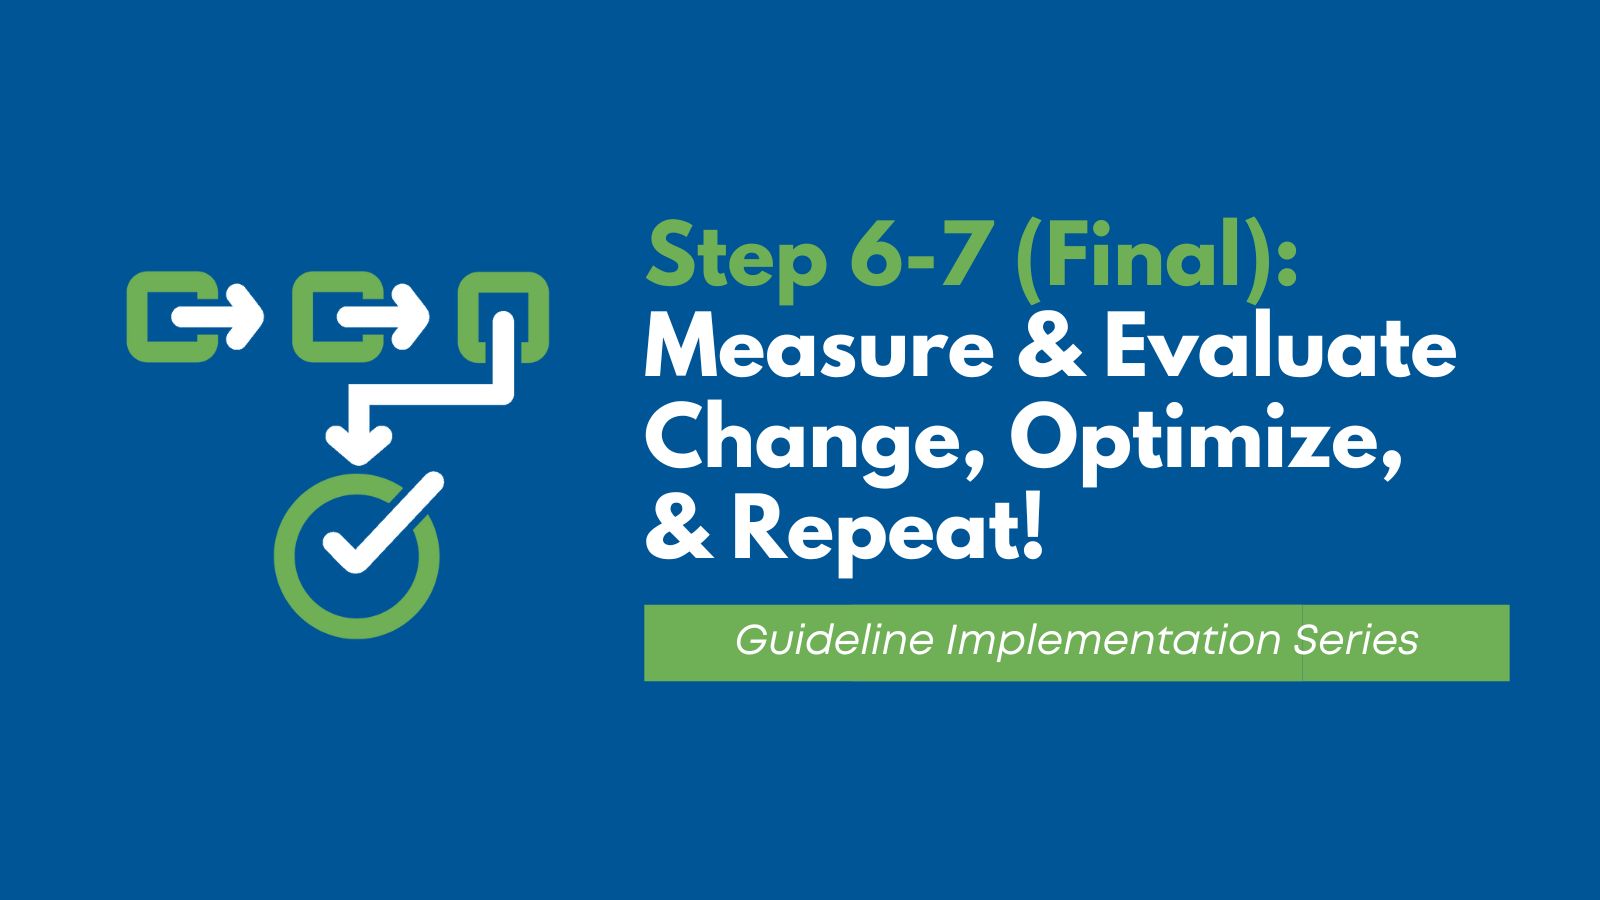 Clinical Guidelines Implementation Strategy - Step 6 & 7: Measure & Evaluate, Change, Optimize & Repeat